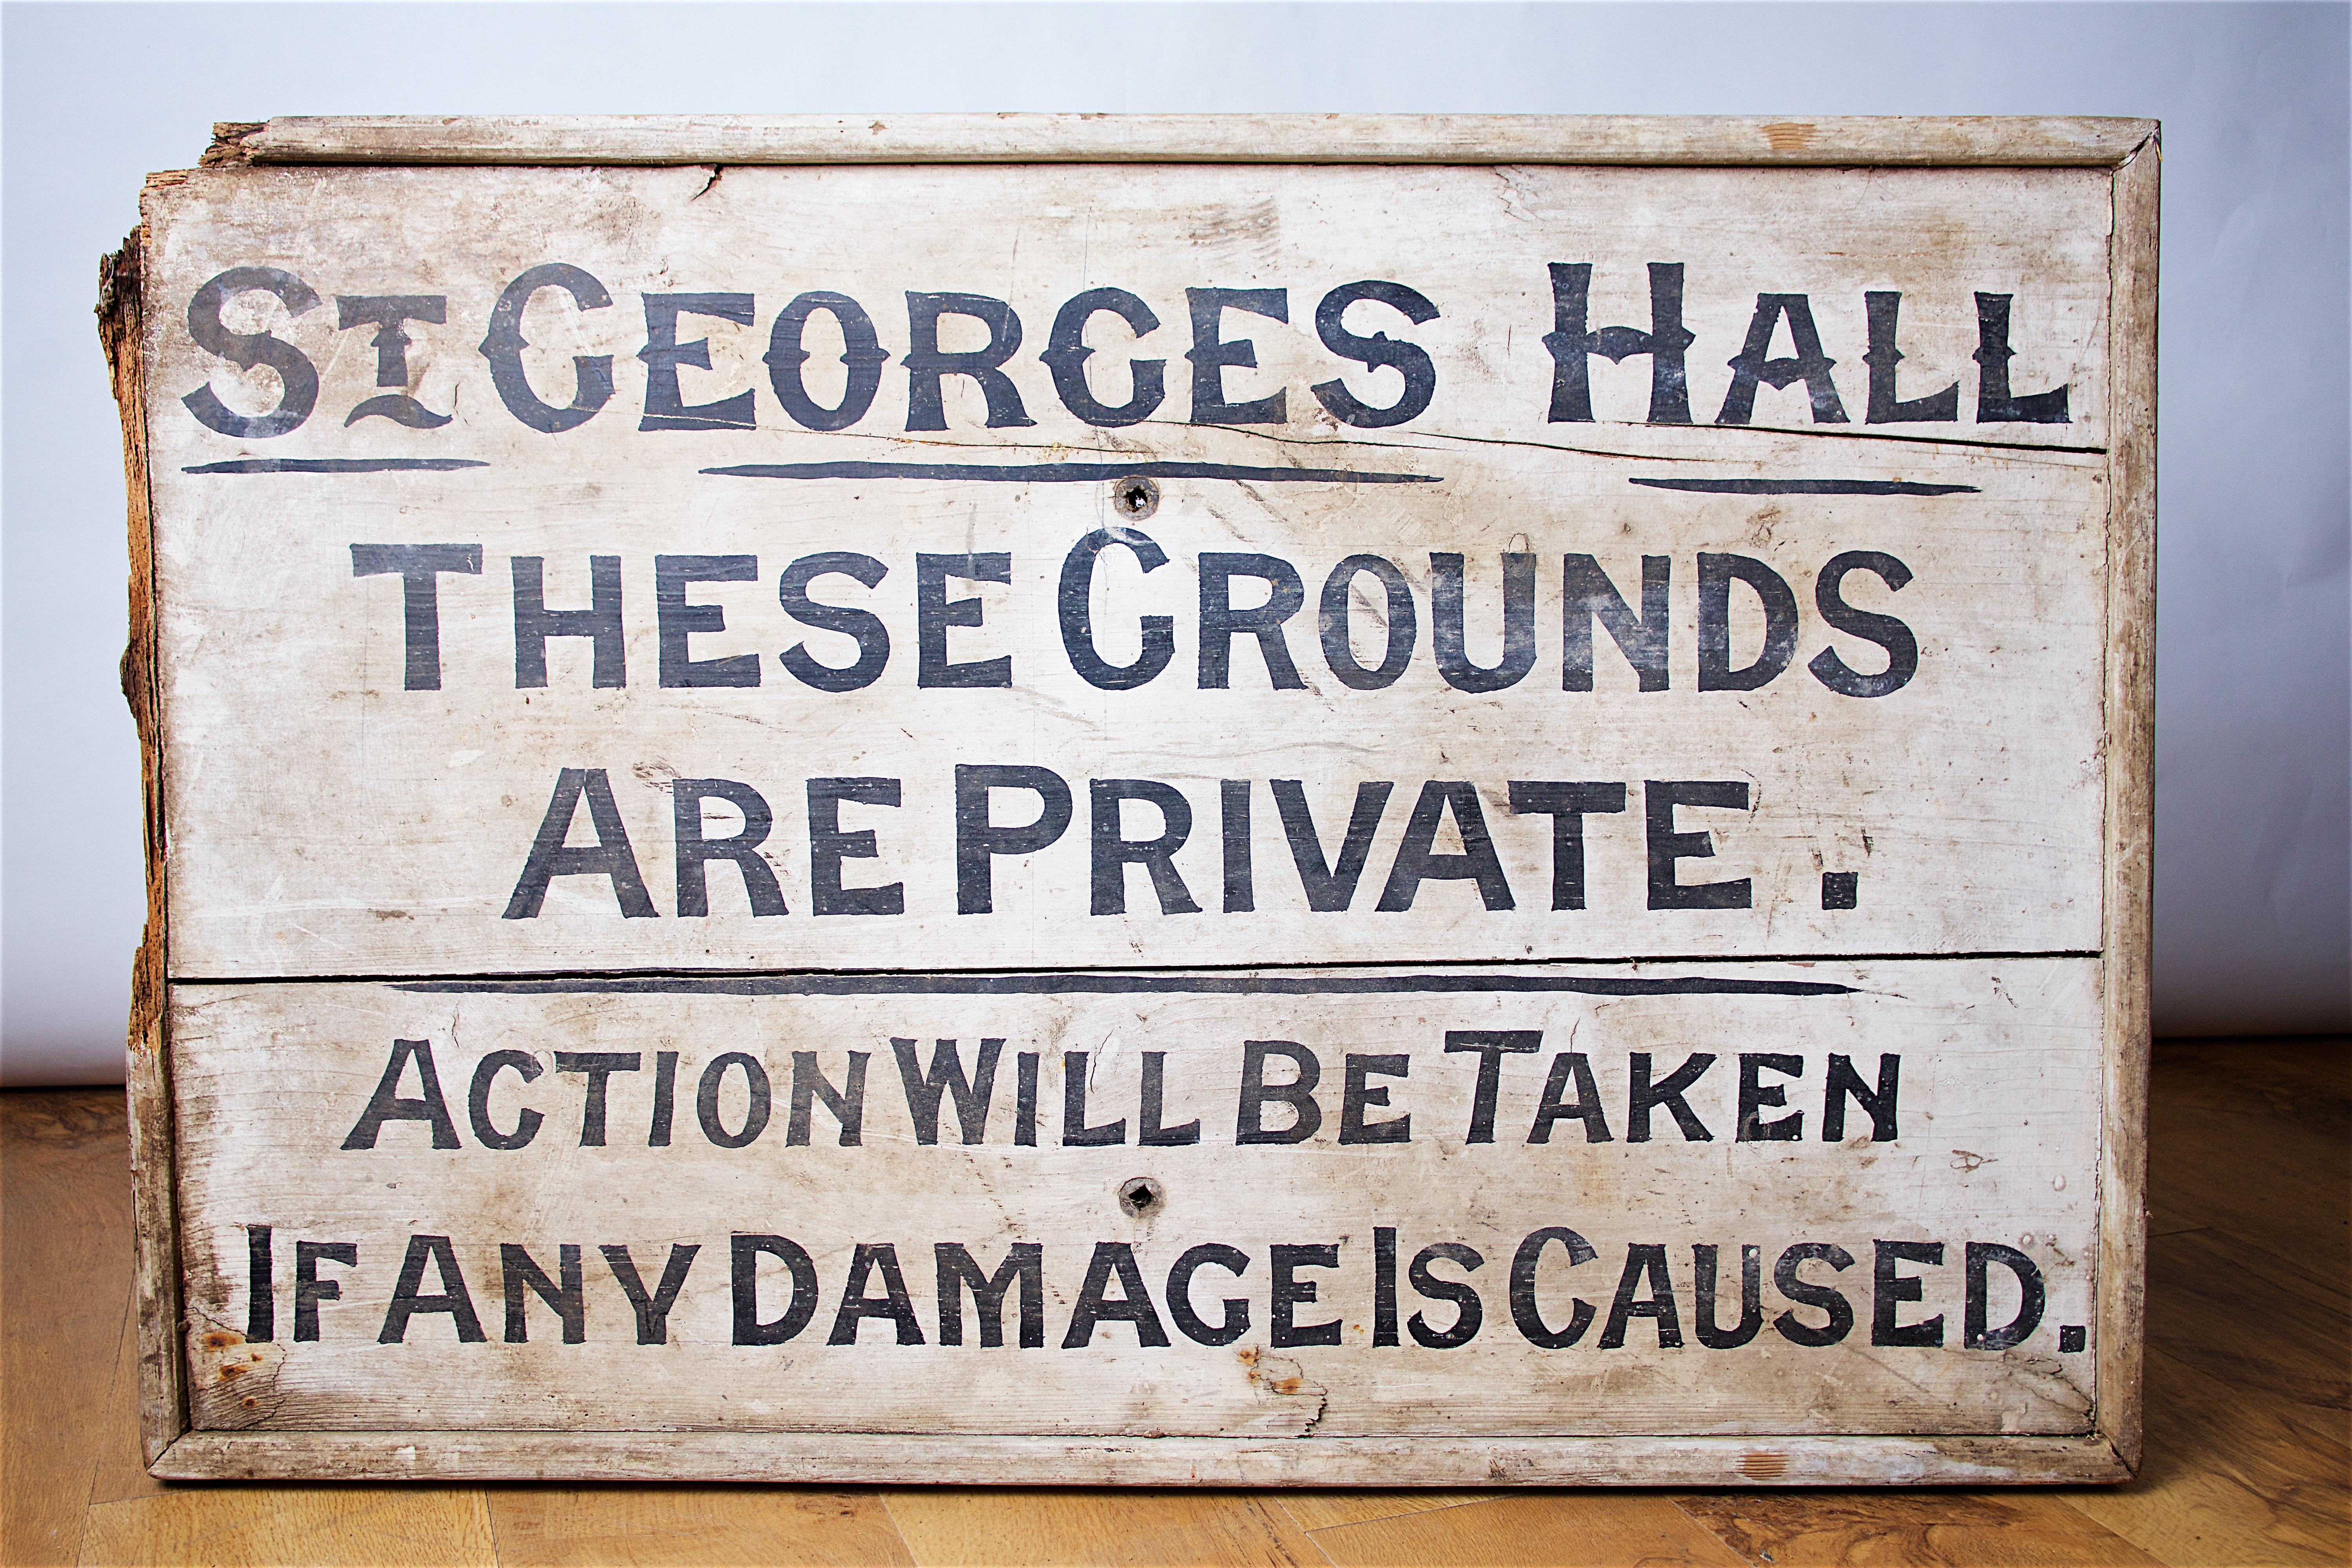 A circa late 19th century hand painted wooden sign, black writing on white background, bearing the legend “St. George’s Hall – these grounds are private, action will be taken if any damage is caused”.